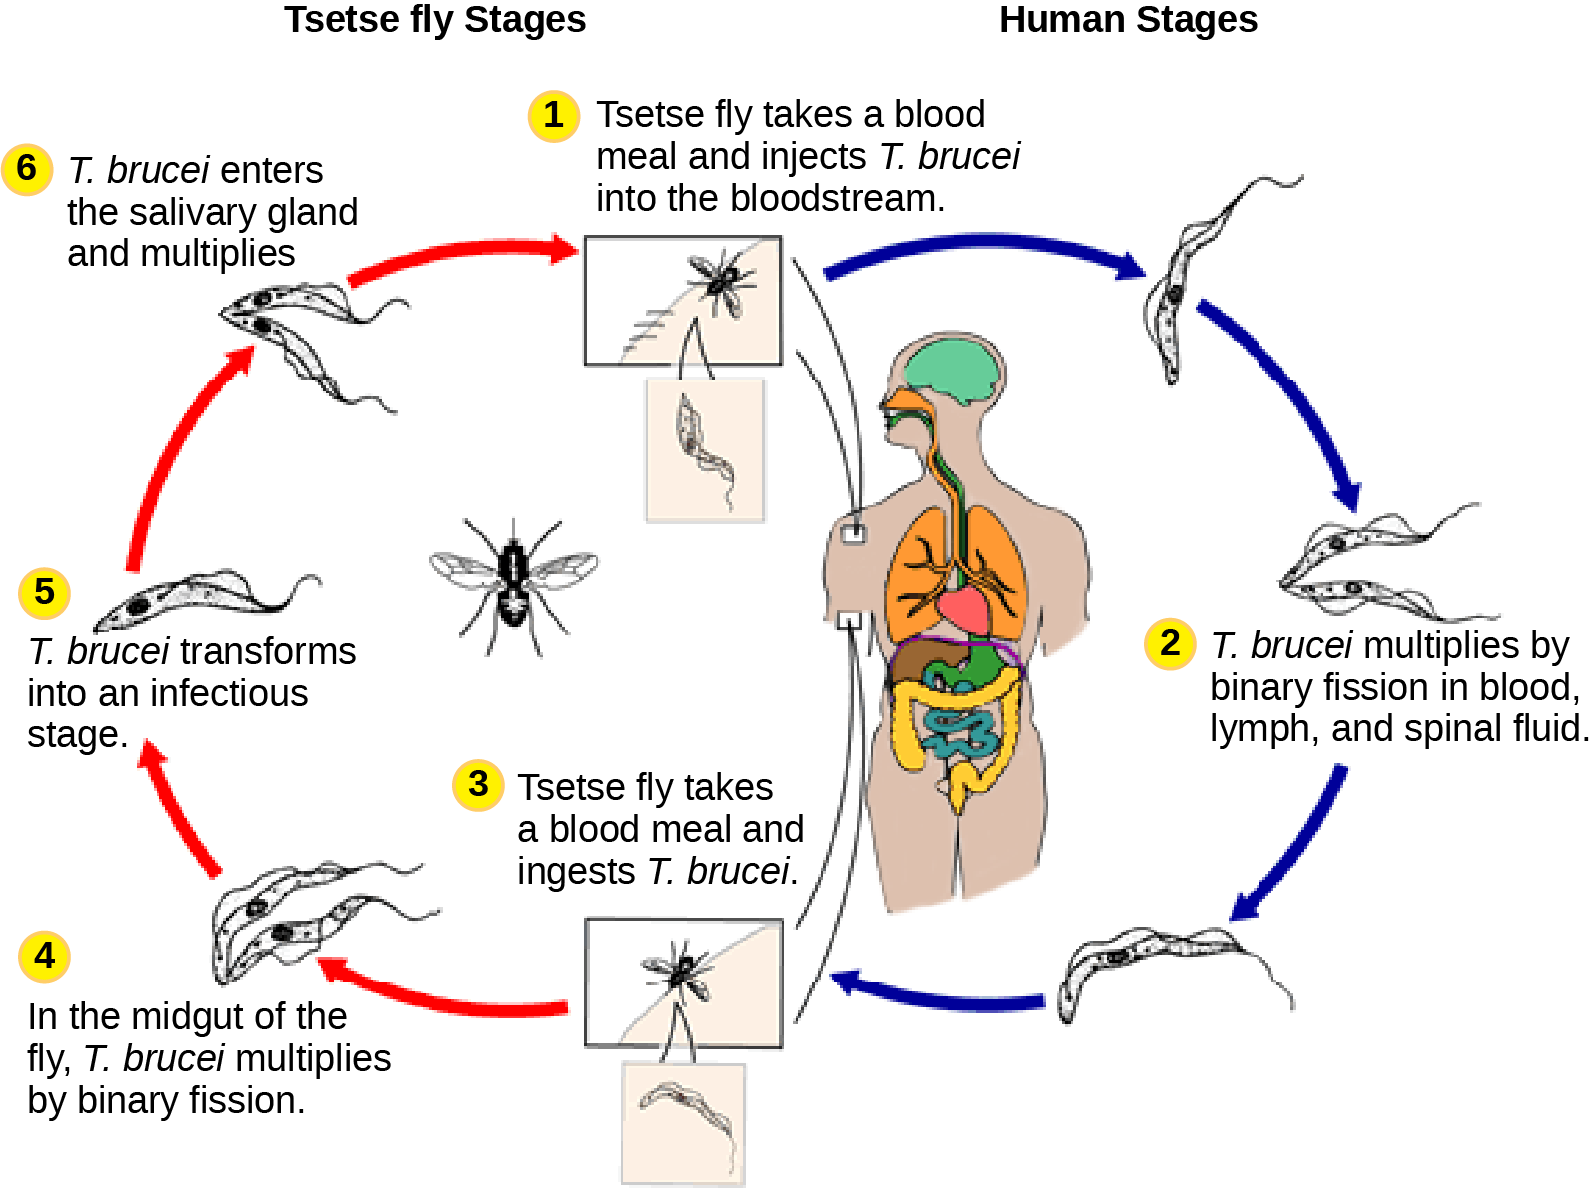 The life cycle of T brucei begins when the tetse fly takes a blood meal from a human host, and injects the parasite into the bloodstream. T brucei multiplies by binary fission in blood, lymph and spinal fluid. When another tsetse fly bites the infected person, it takes up the pathogen, which then multiplies by binary fission in the flys midgut. T brucei transforms into an infective stage and enters the salivary gland, where it multiplies. The cycle is completed when the fly takes a blood meal from another human.